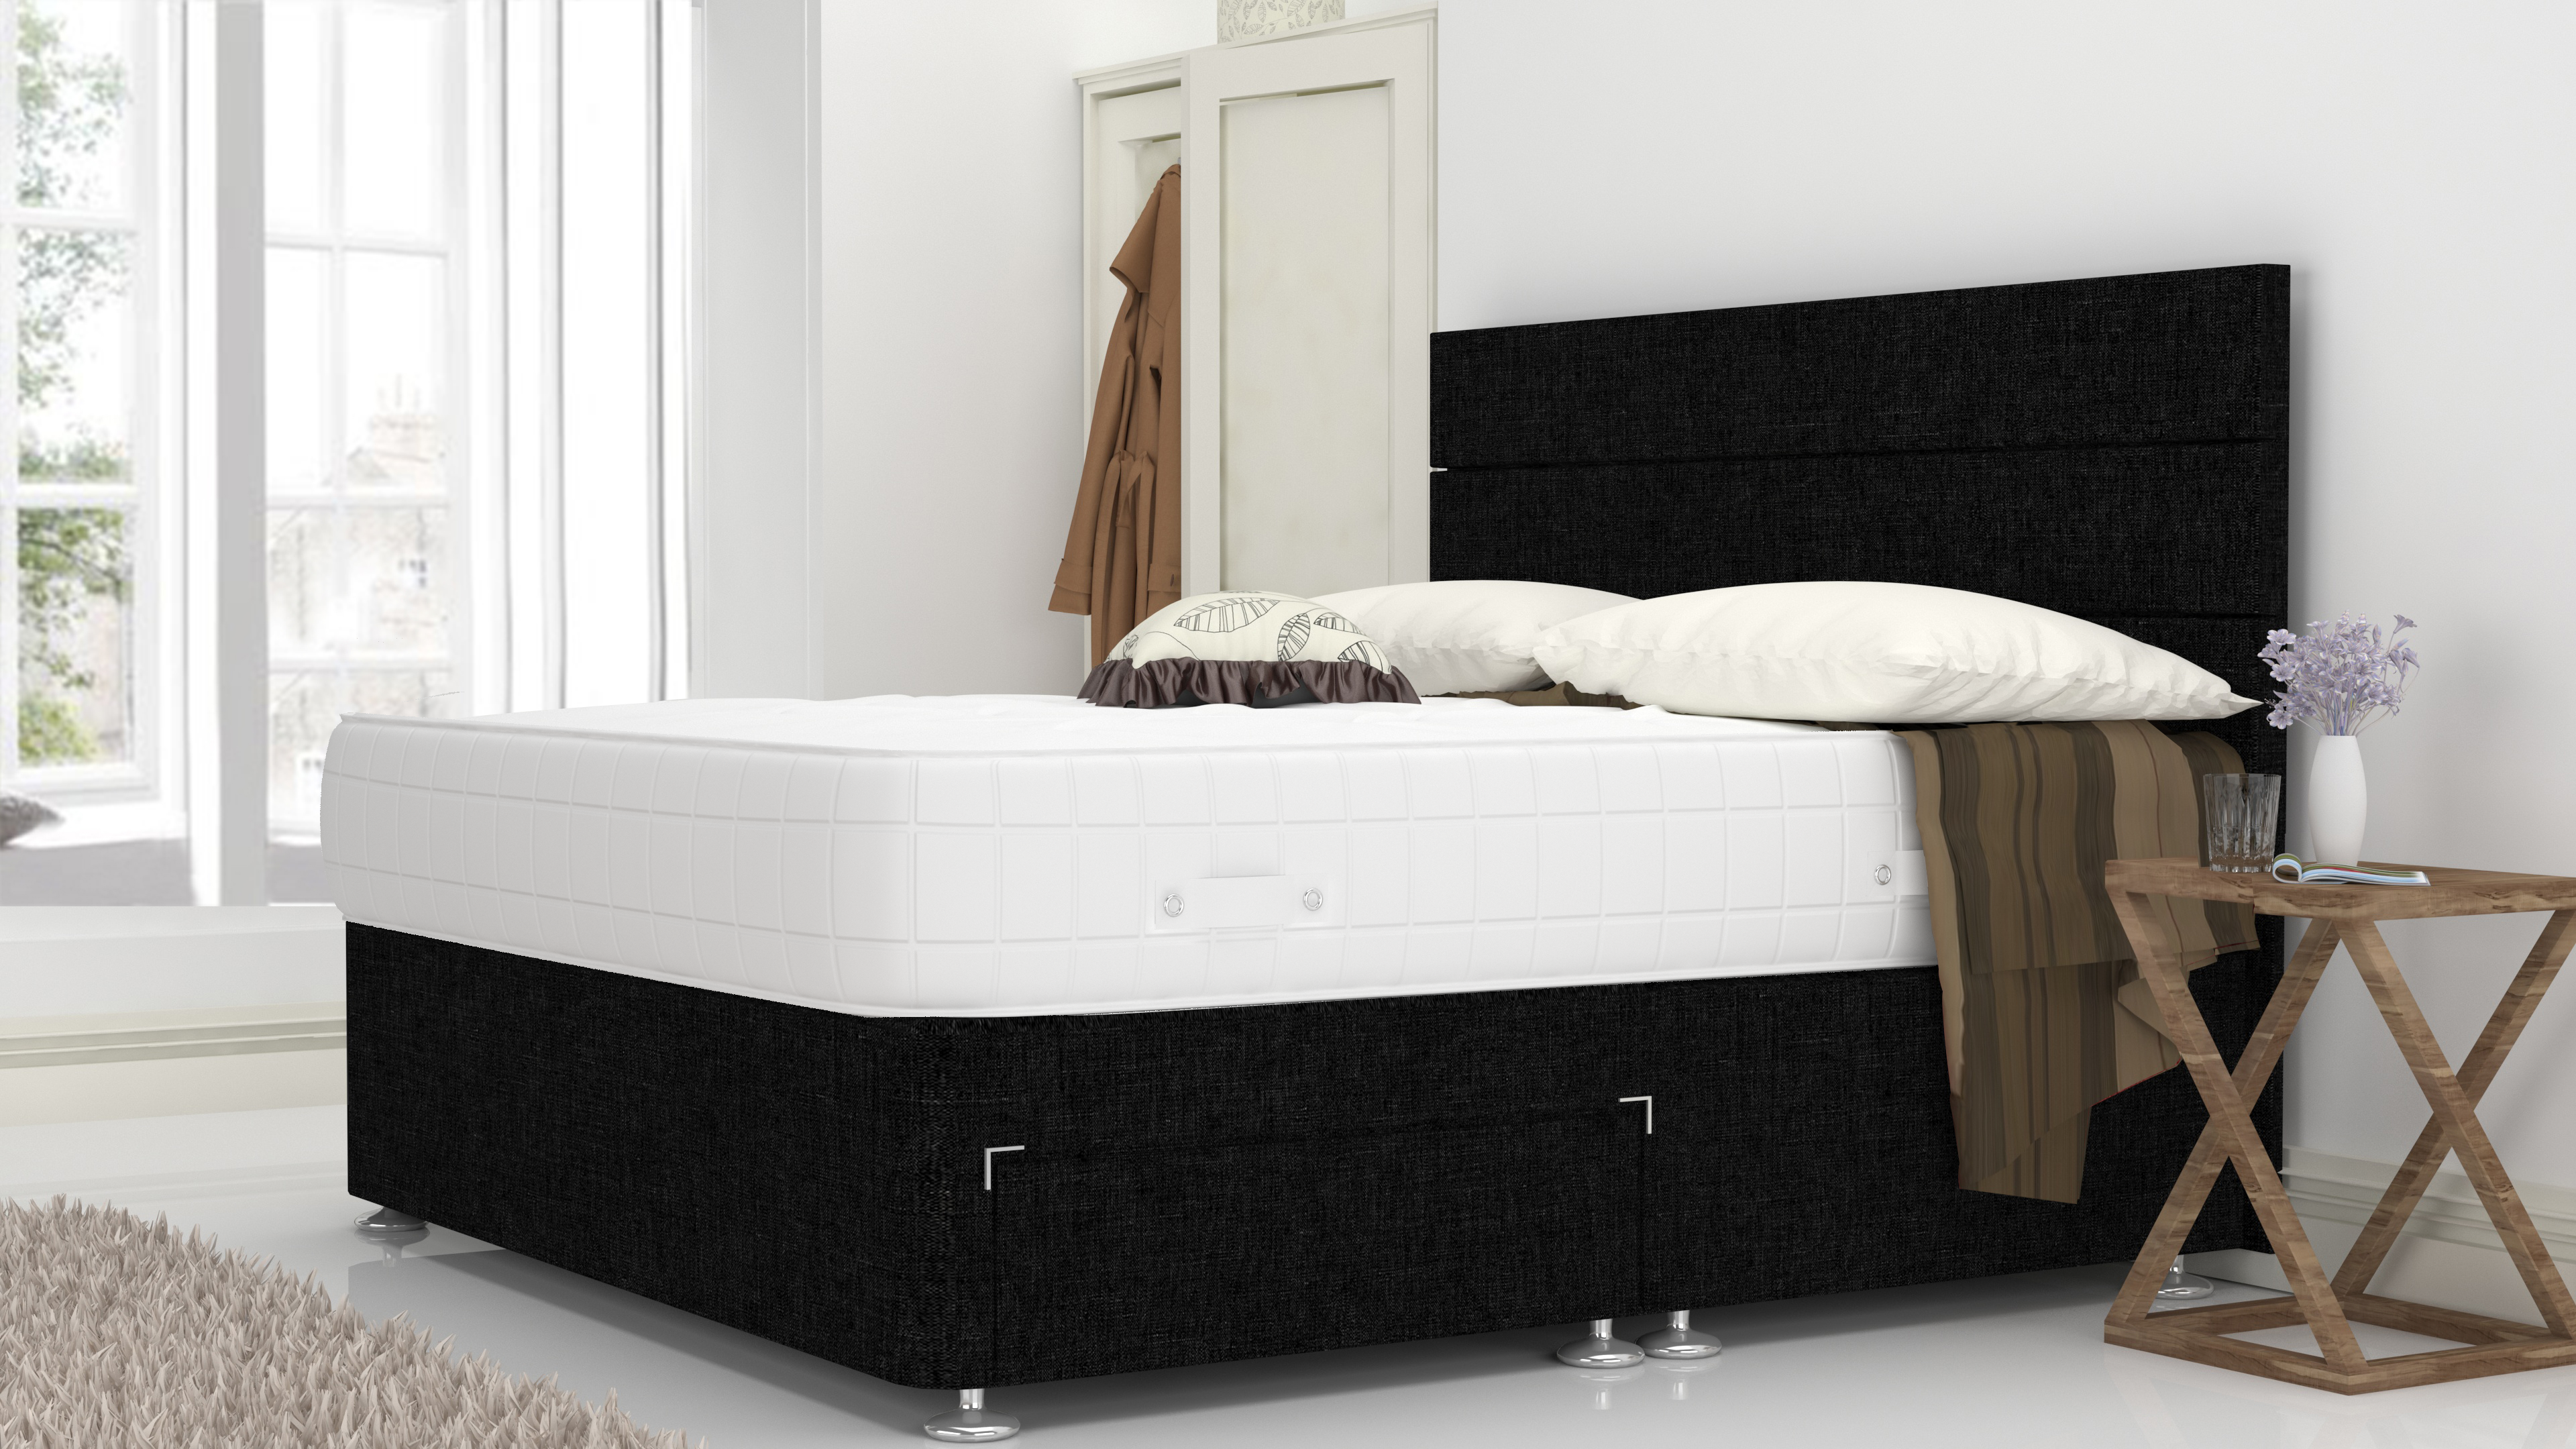 Black Venice 4FT 6" Divan Bed Set With 3 Panel Headboard (Included Feet) And Free Pocket Sprung Mattress